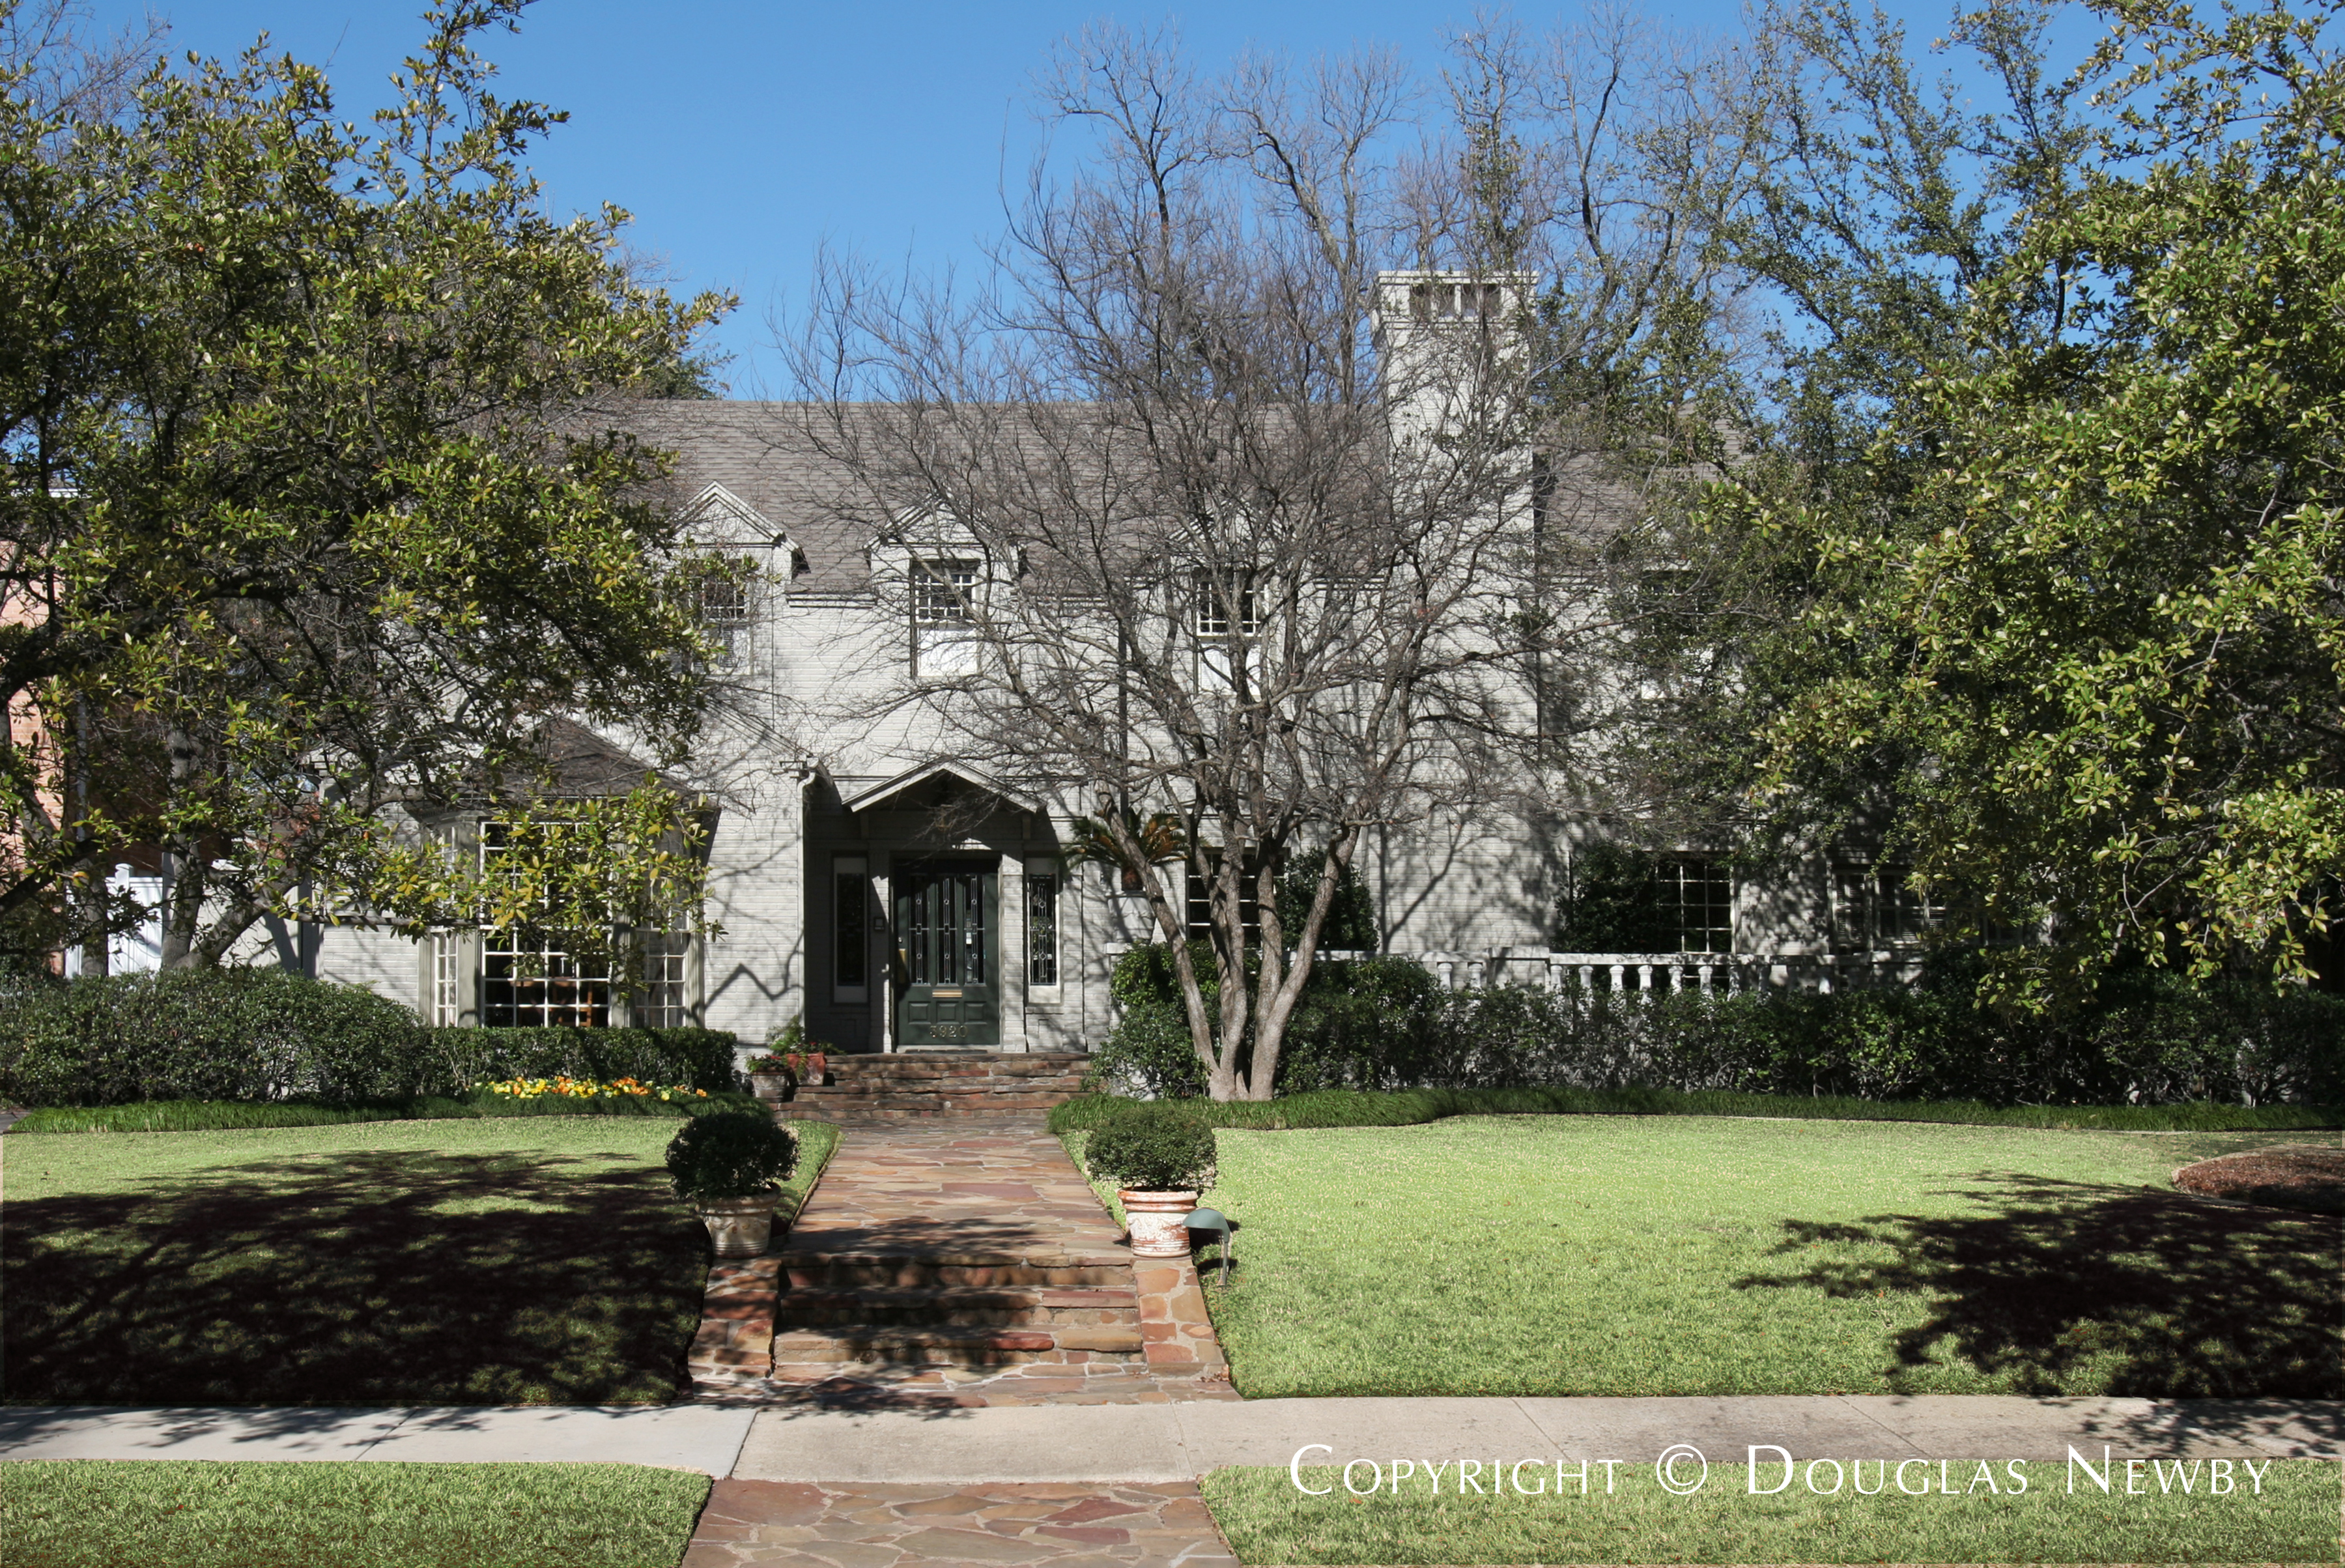 homes in highland park texas